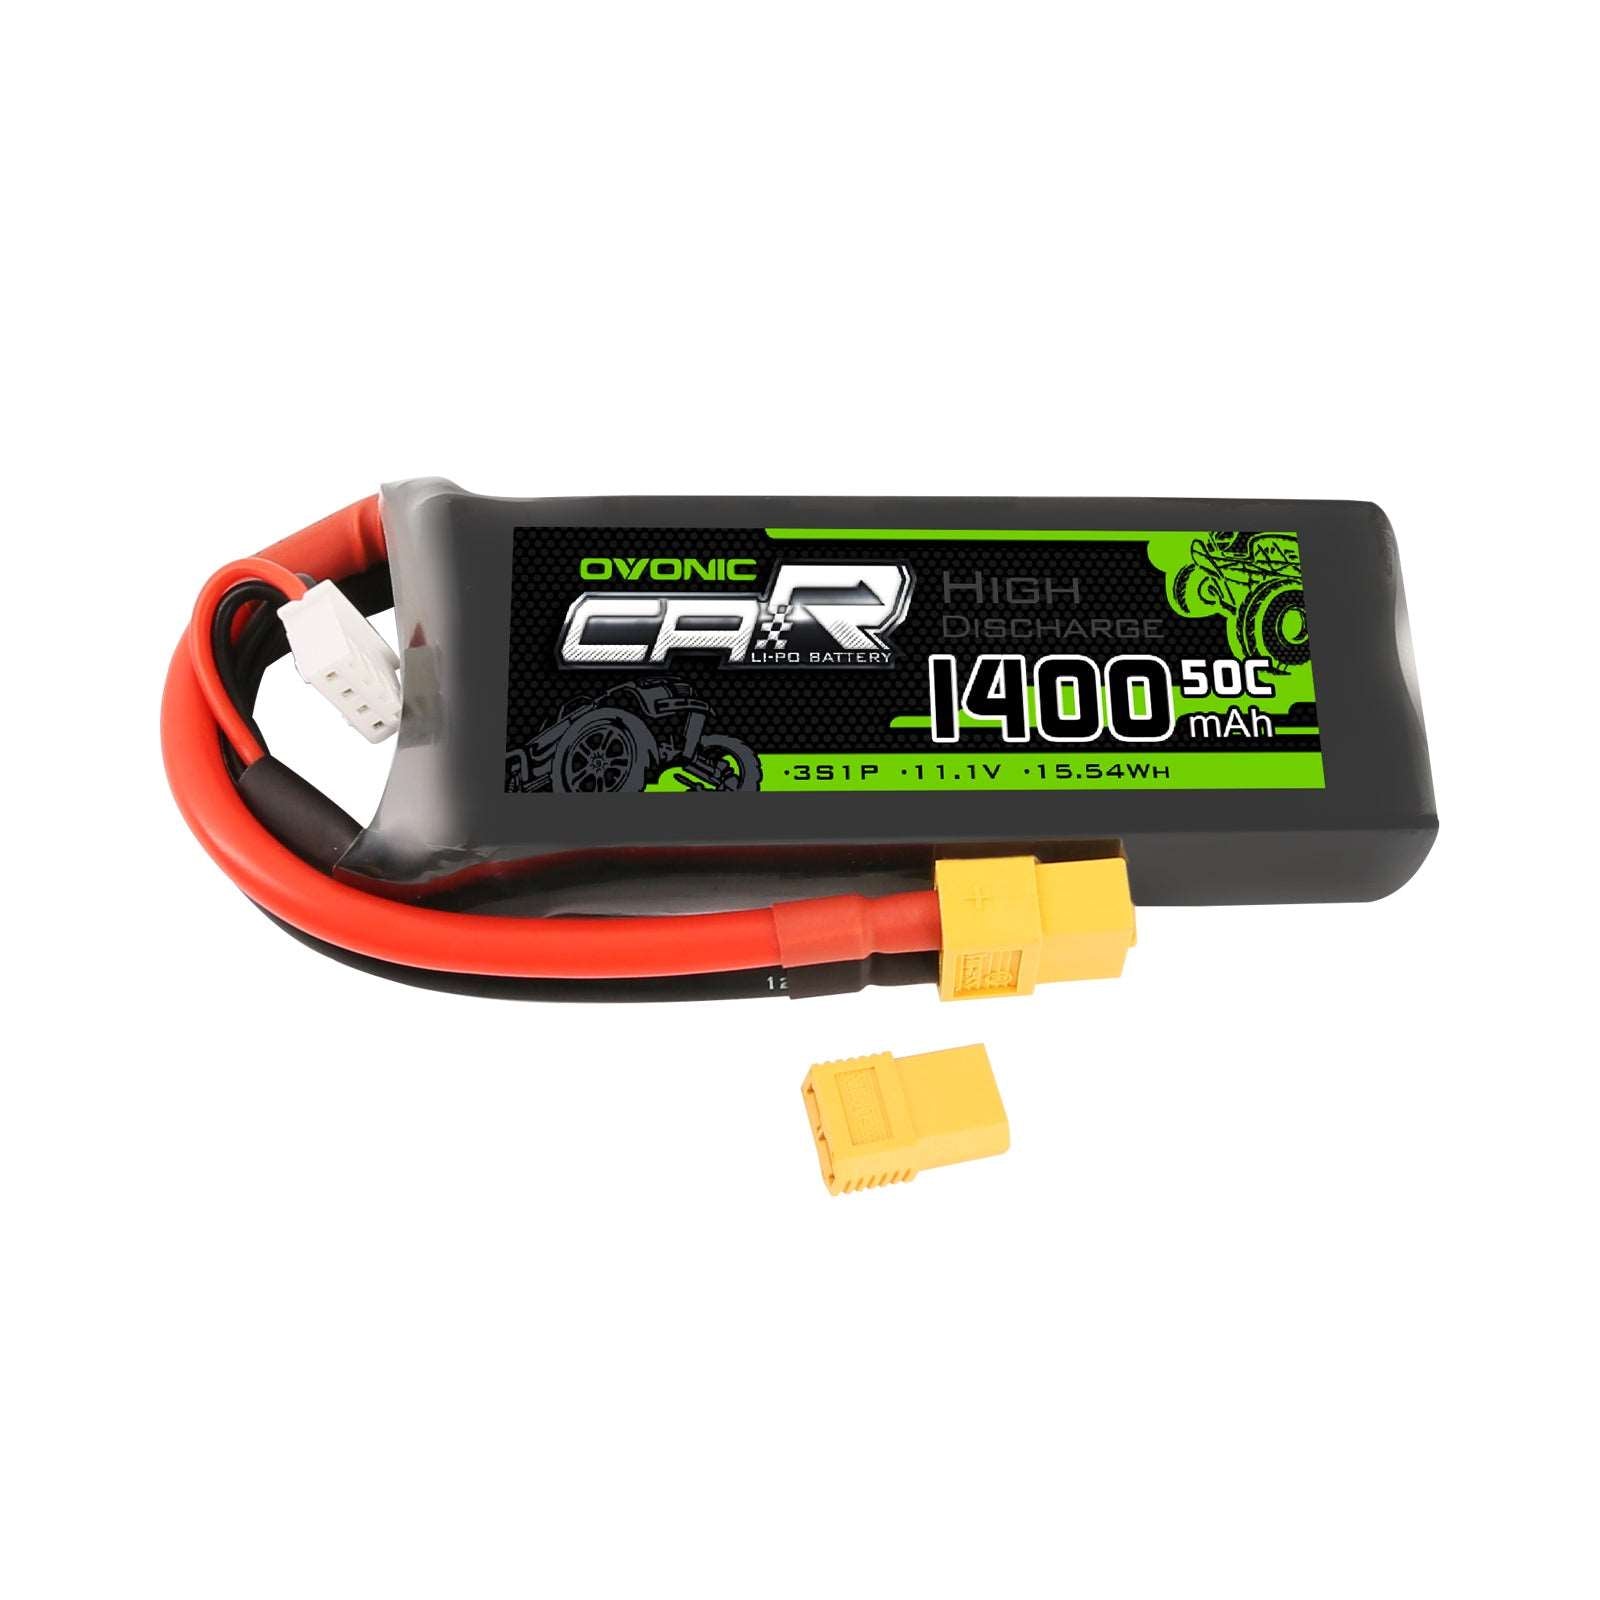 OVONIC 11.1V 1400mAh 3S 50C Lipo Battery with XT60 & Trx Plug for 1/16 Traxxas Cars - Ampow